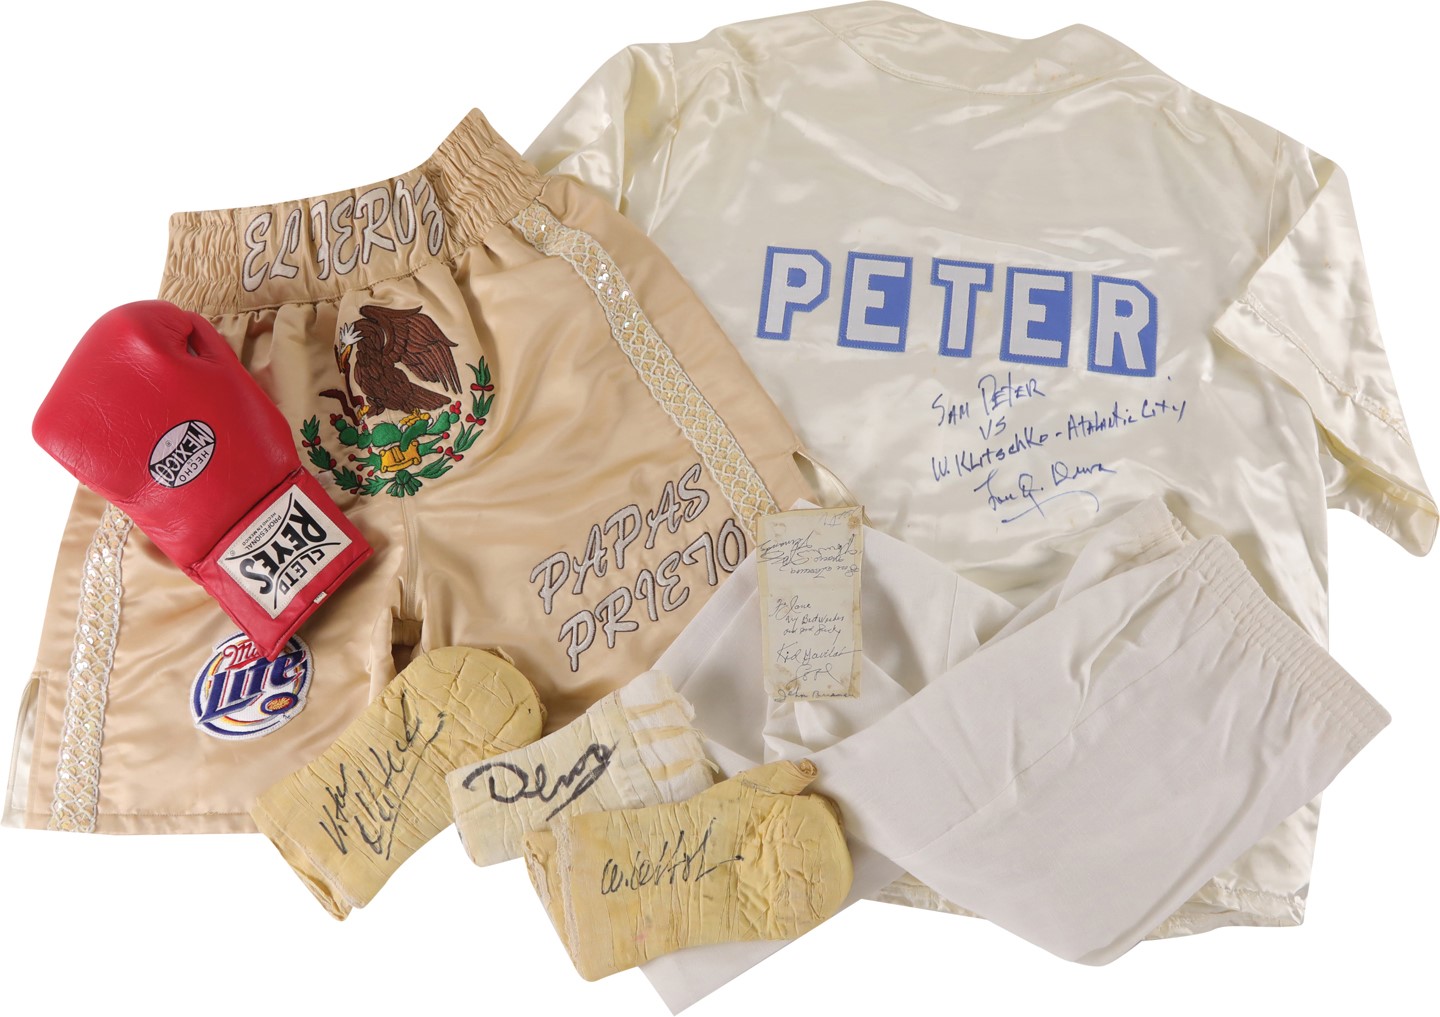 Muhammad Ali & Boxing - Boxing Fight Worn & Autograph Collection with Big Names (8)